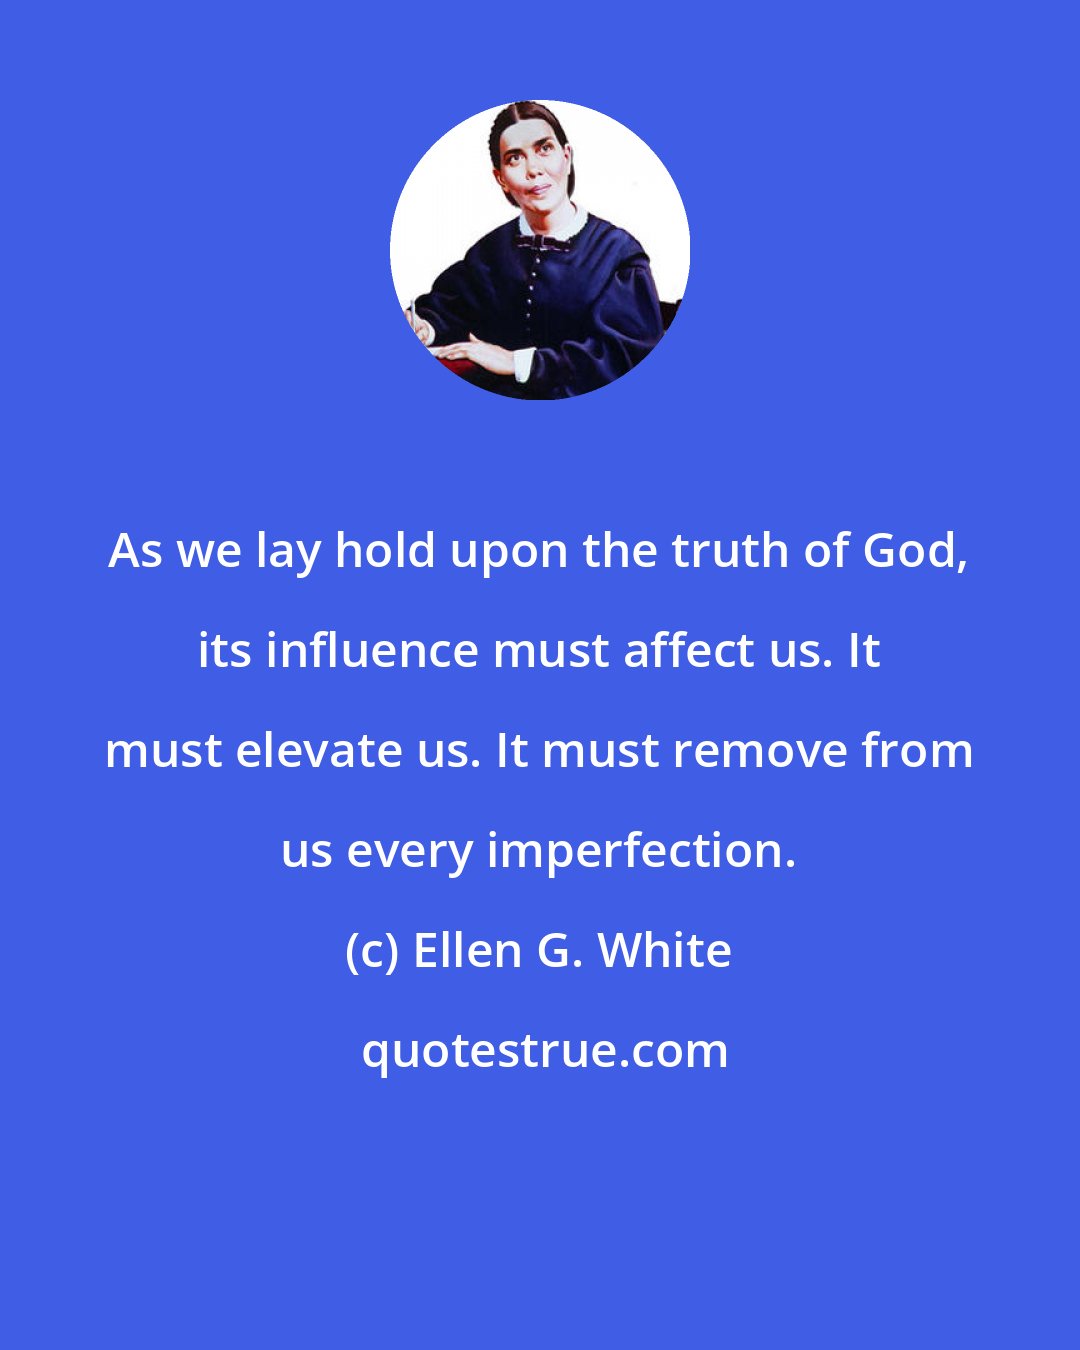 Ellen G. White: As we lay hold upon the truth of God, its influence must affect us. It must elevate us. It must remove from us every imperfection.